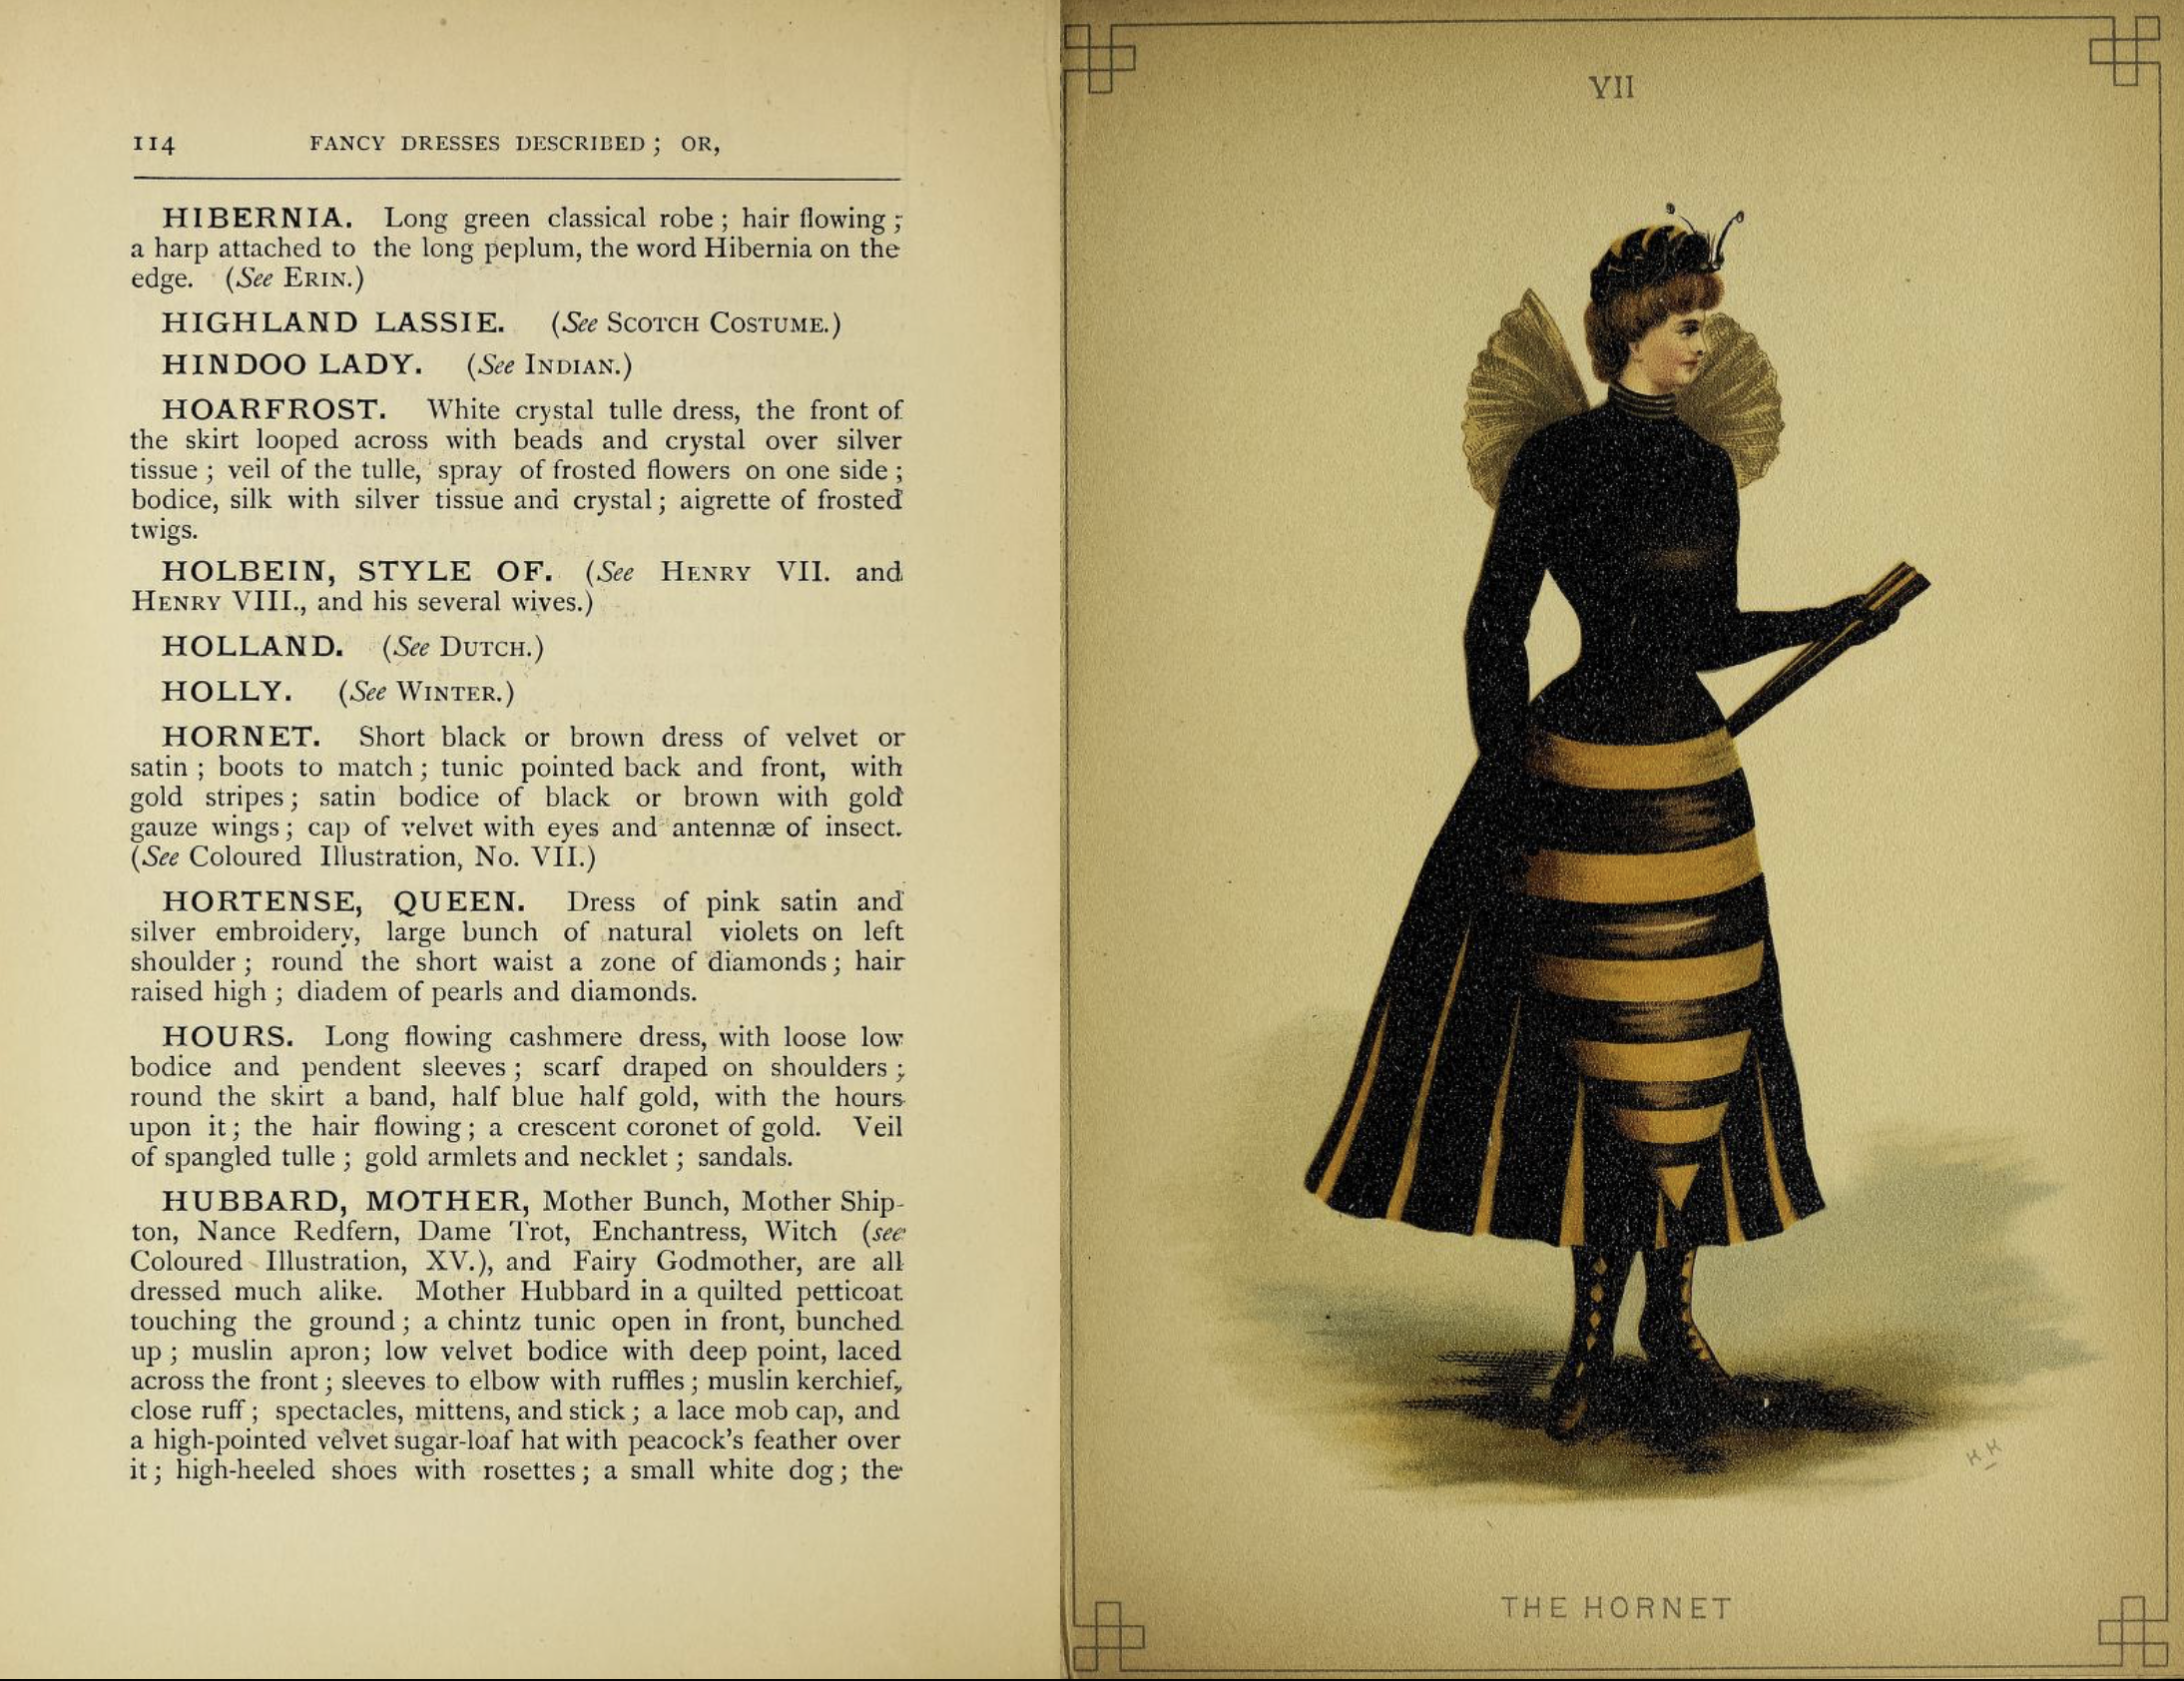 Illustrated book from the Victorian Era. A color plate on one page depicts a woman in fancy dress, wearing small wings and a hornet stripe-inspired skirt.